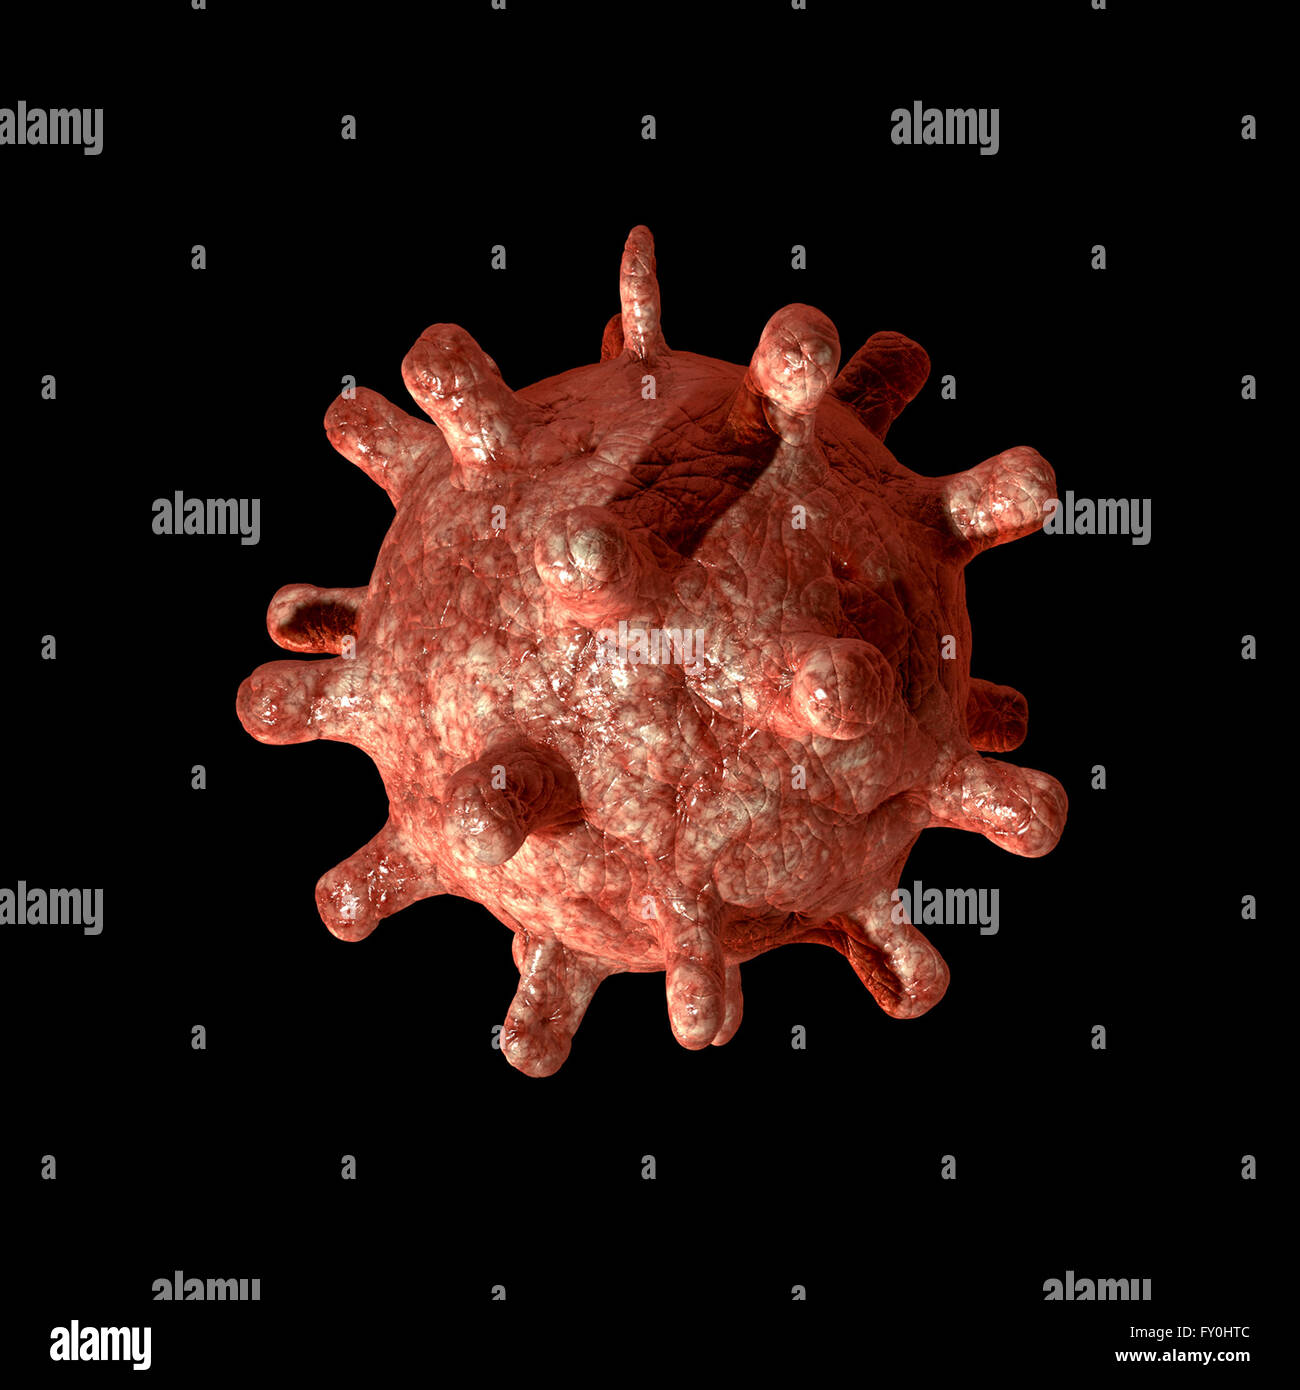 Virus, bacteria cells infecting human body.Detailed 3d illustration Stock Photo